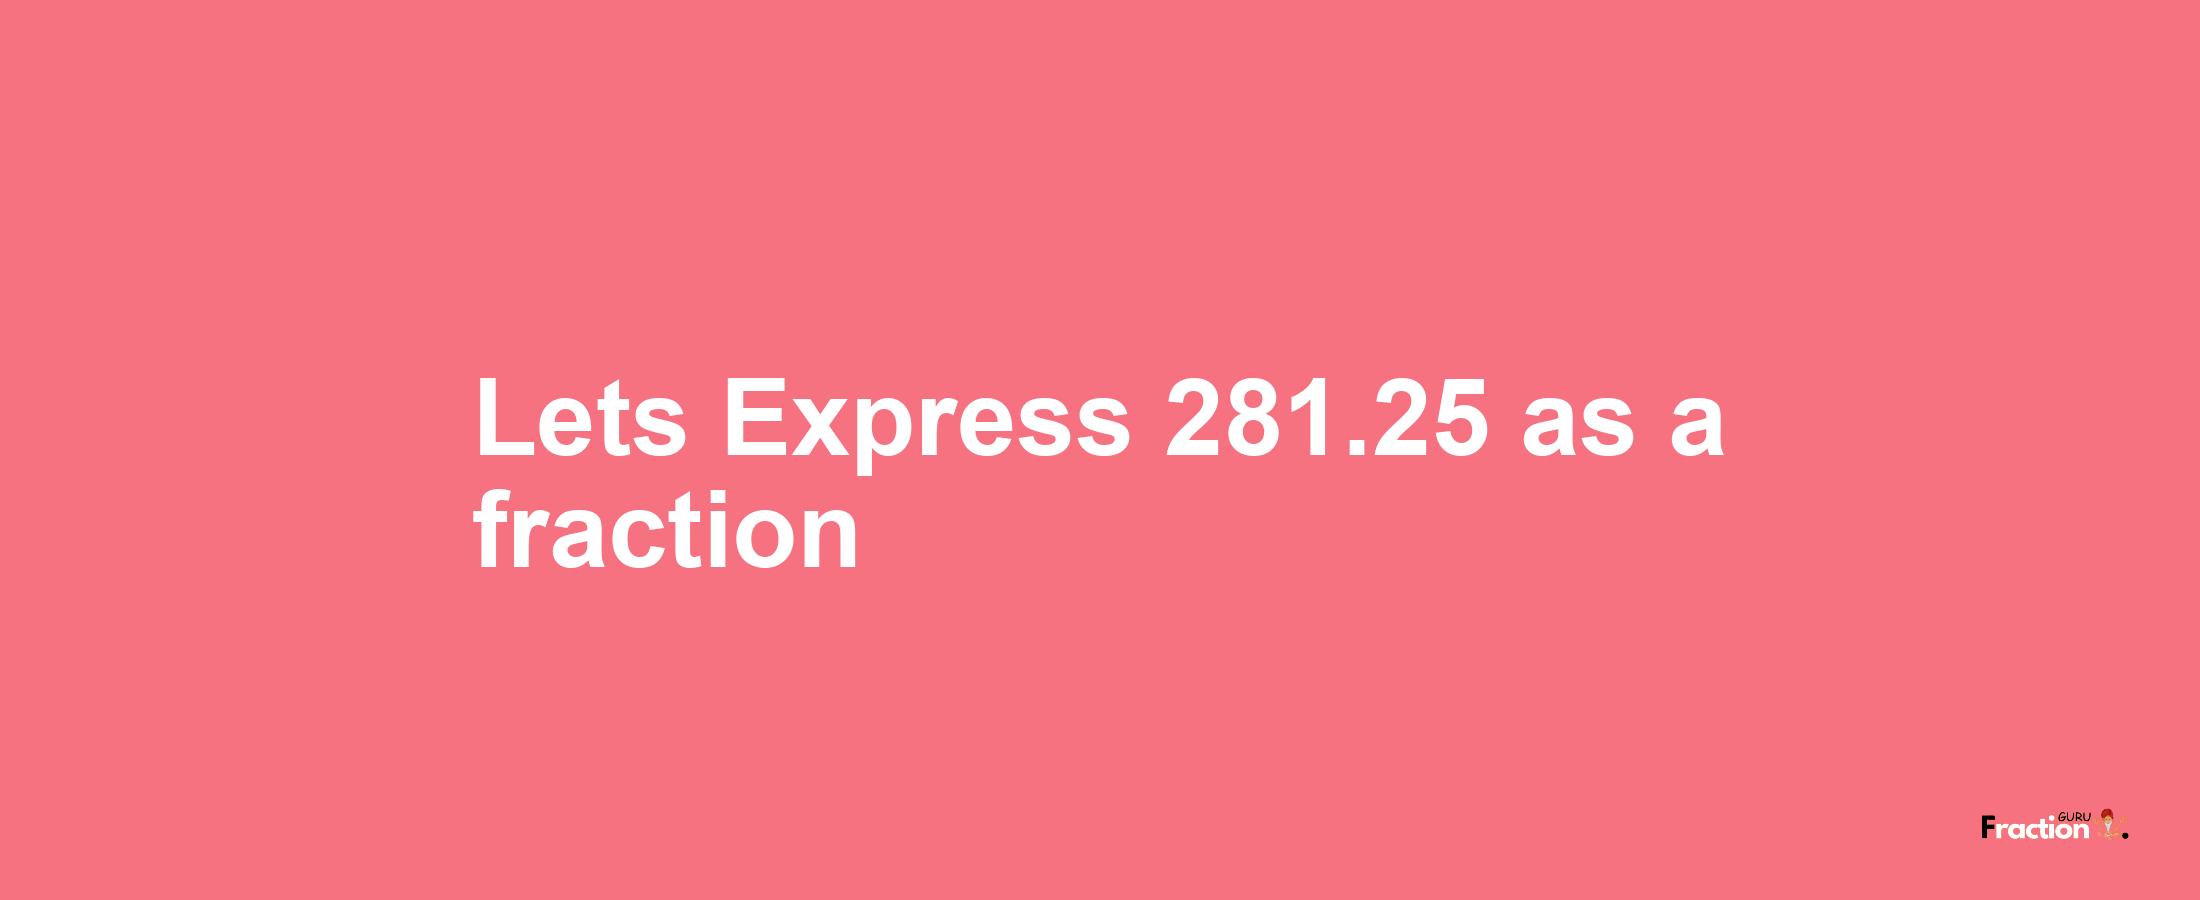 Lets Express 281.25 as afraction